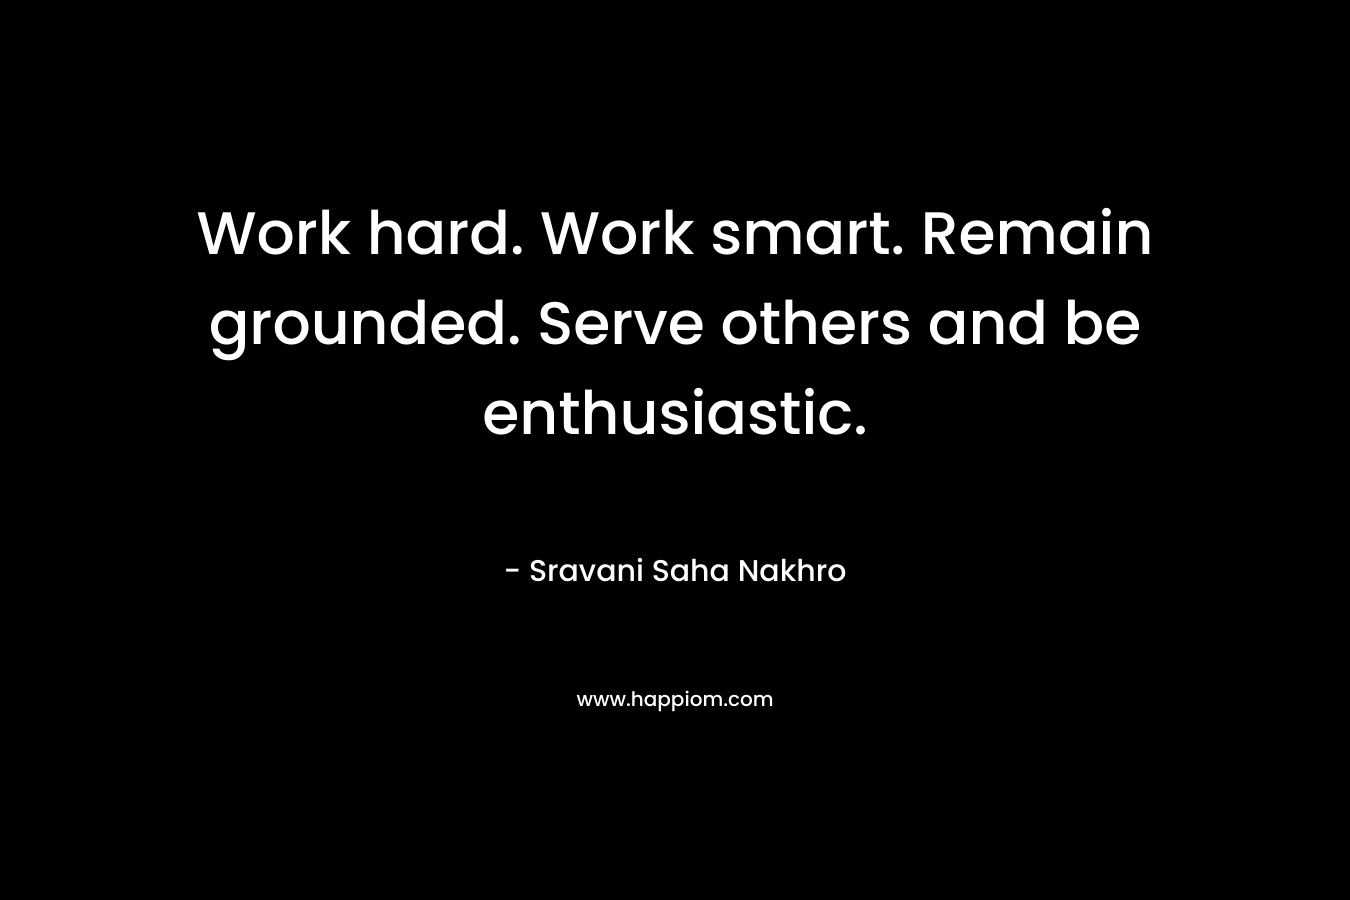 Work hard. Work smart. Remain grounded. Serve others and be enthusiastic.